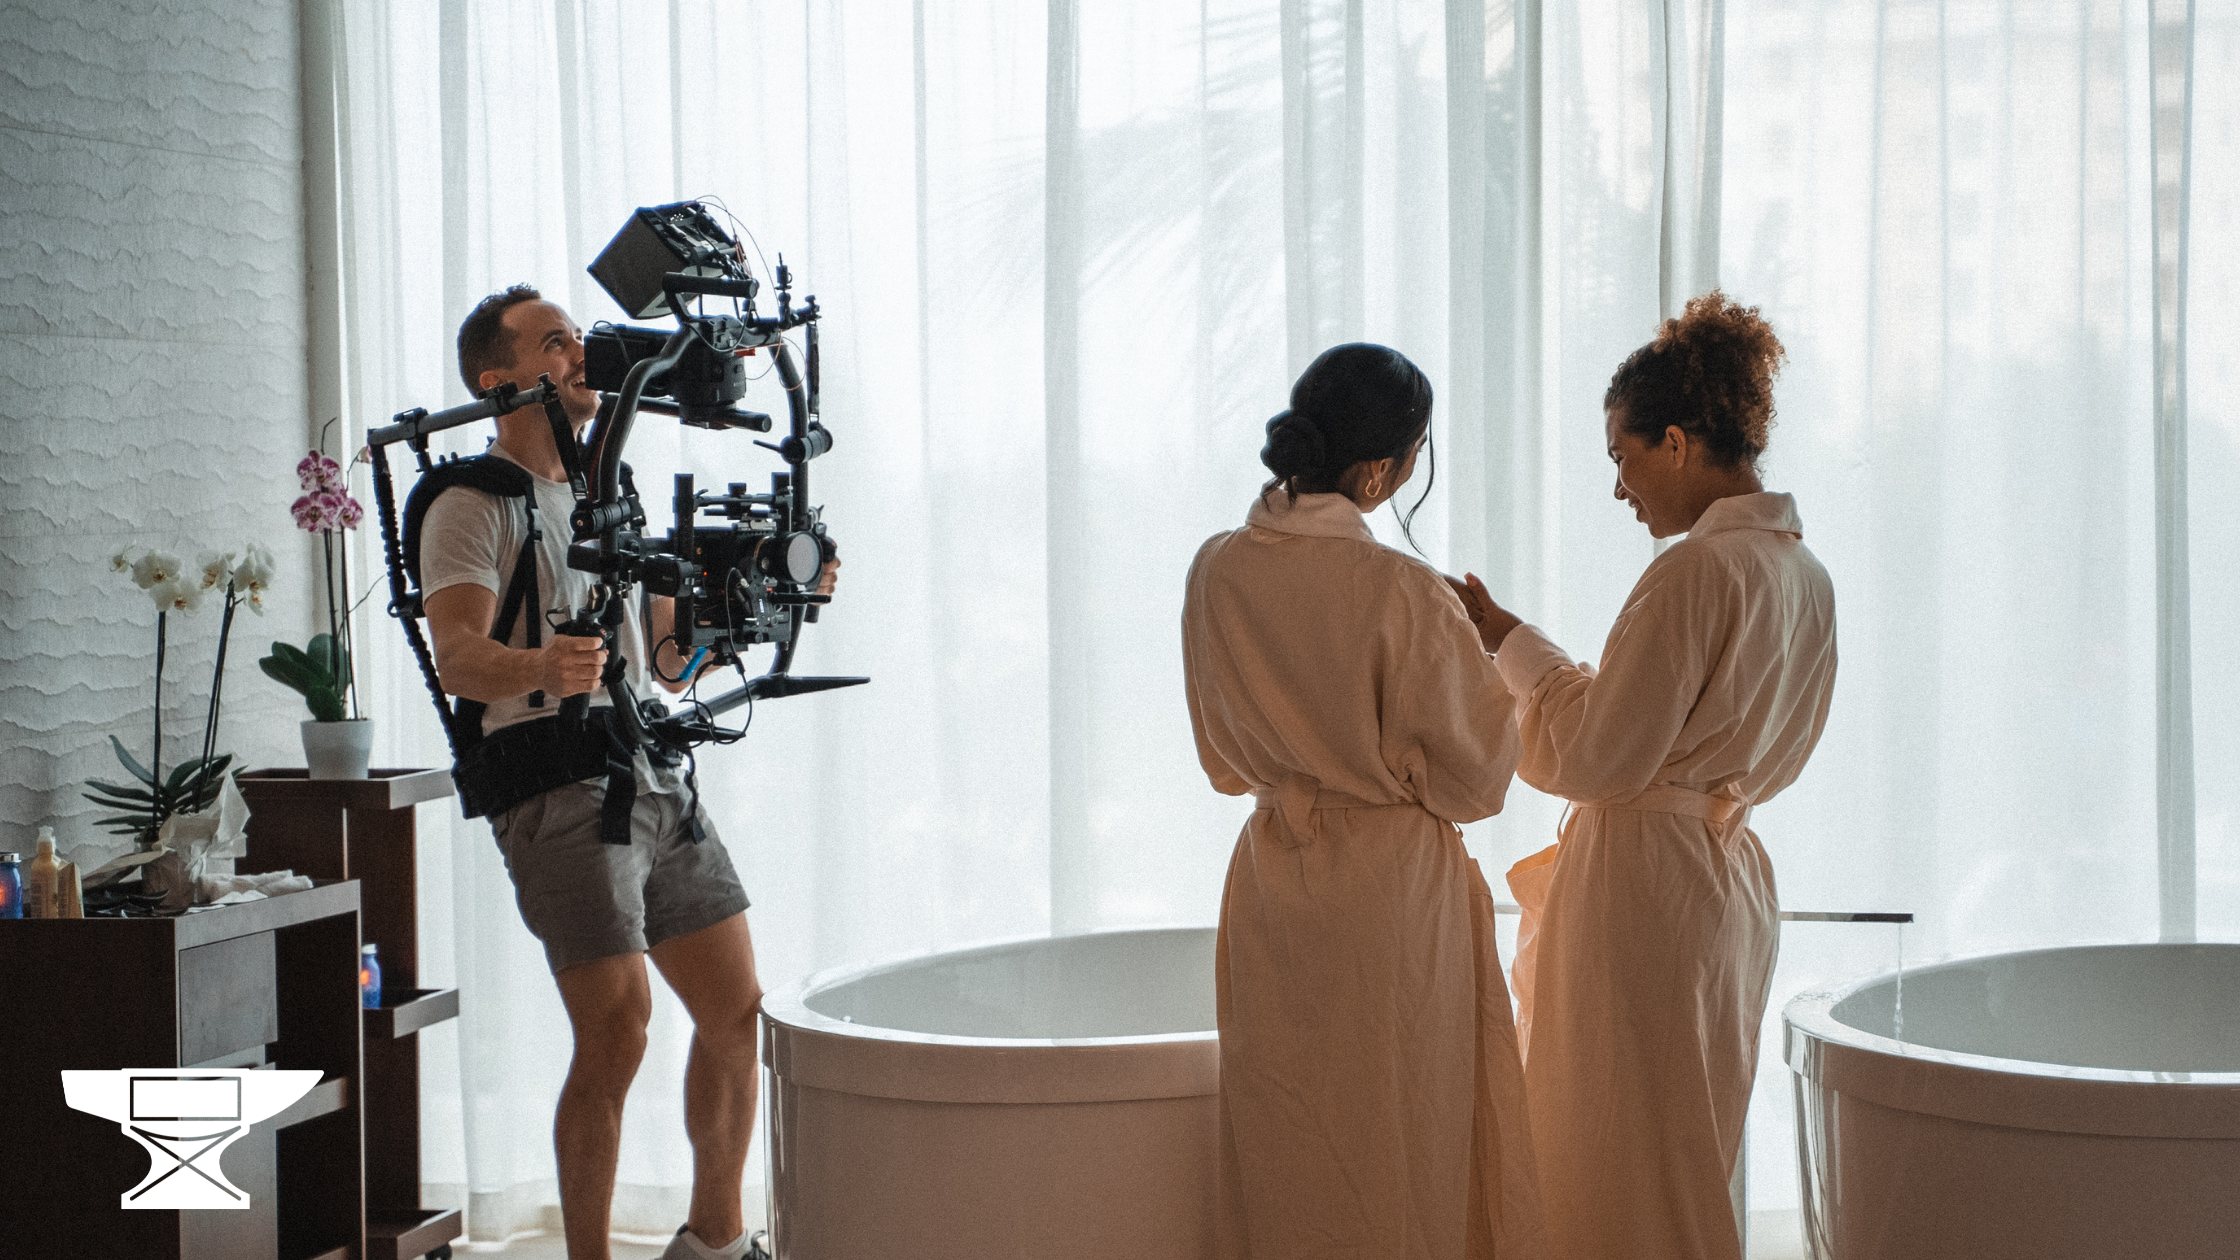 Video production crew member filming two women talking in a resort spa